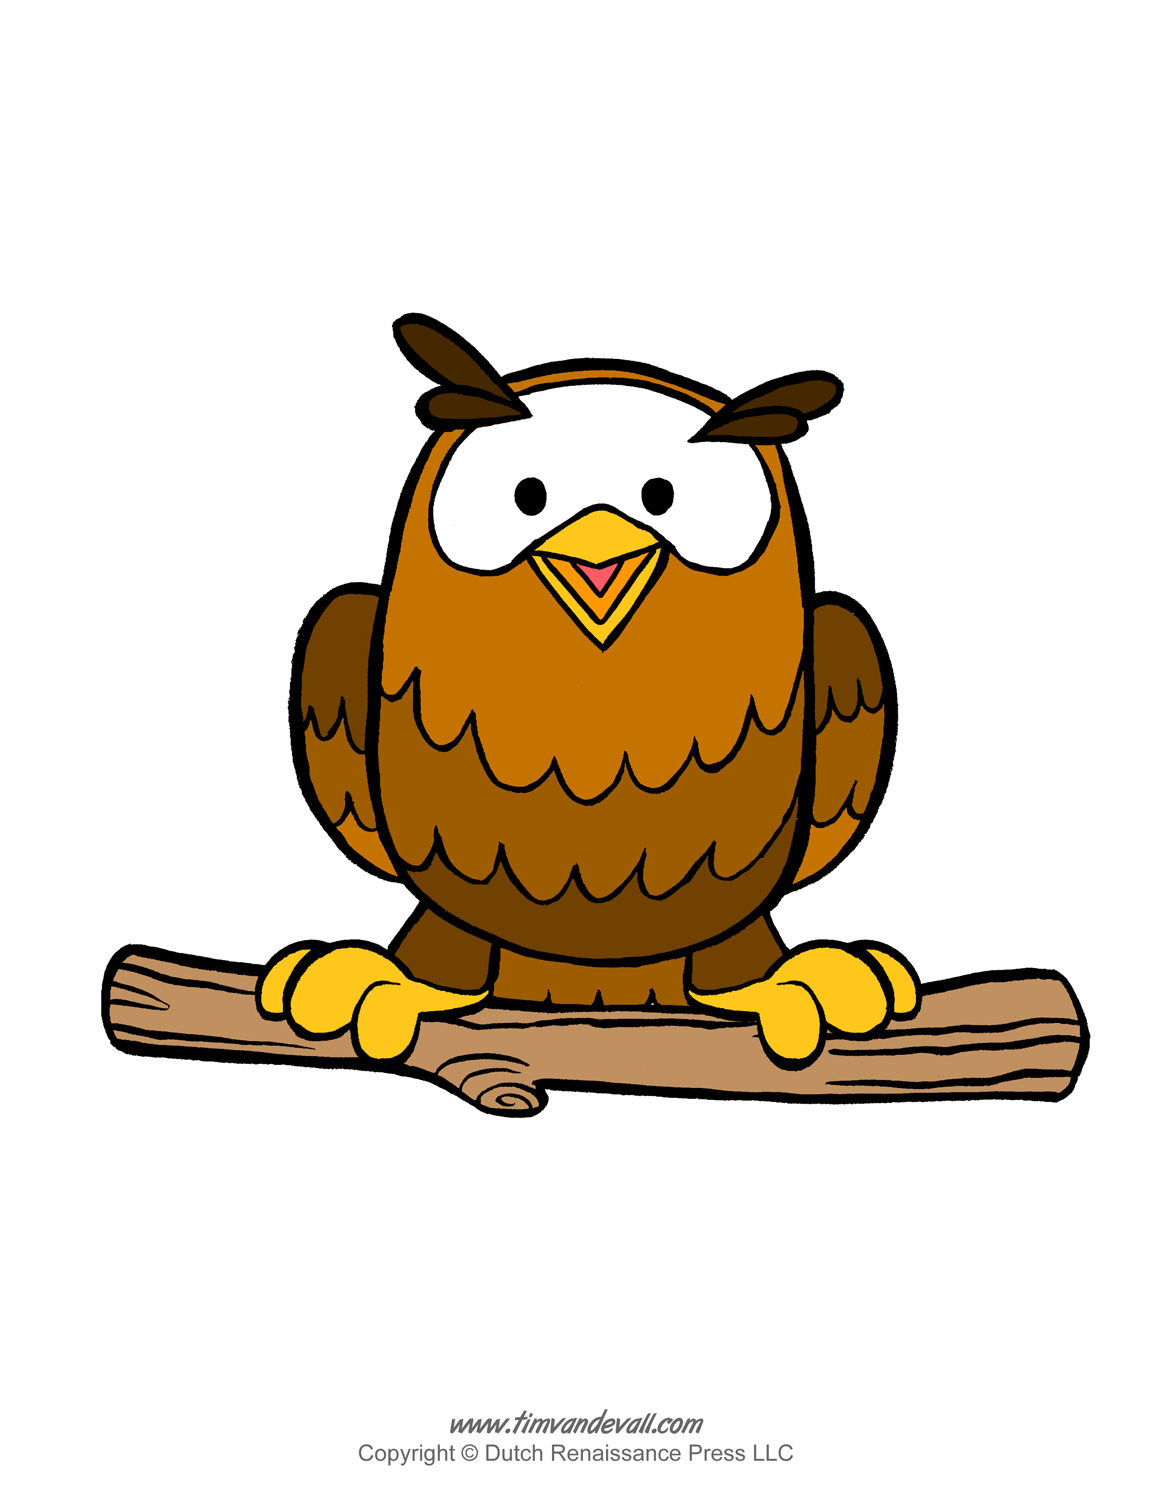 Printable Owl Template, Owl Coloring Pages, and Owl Clipart